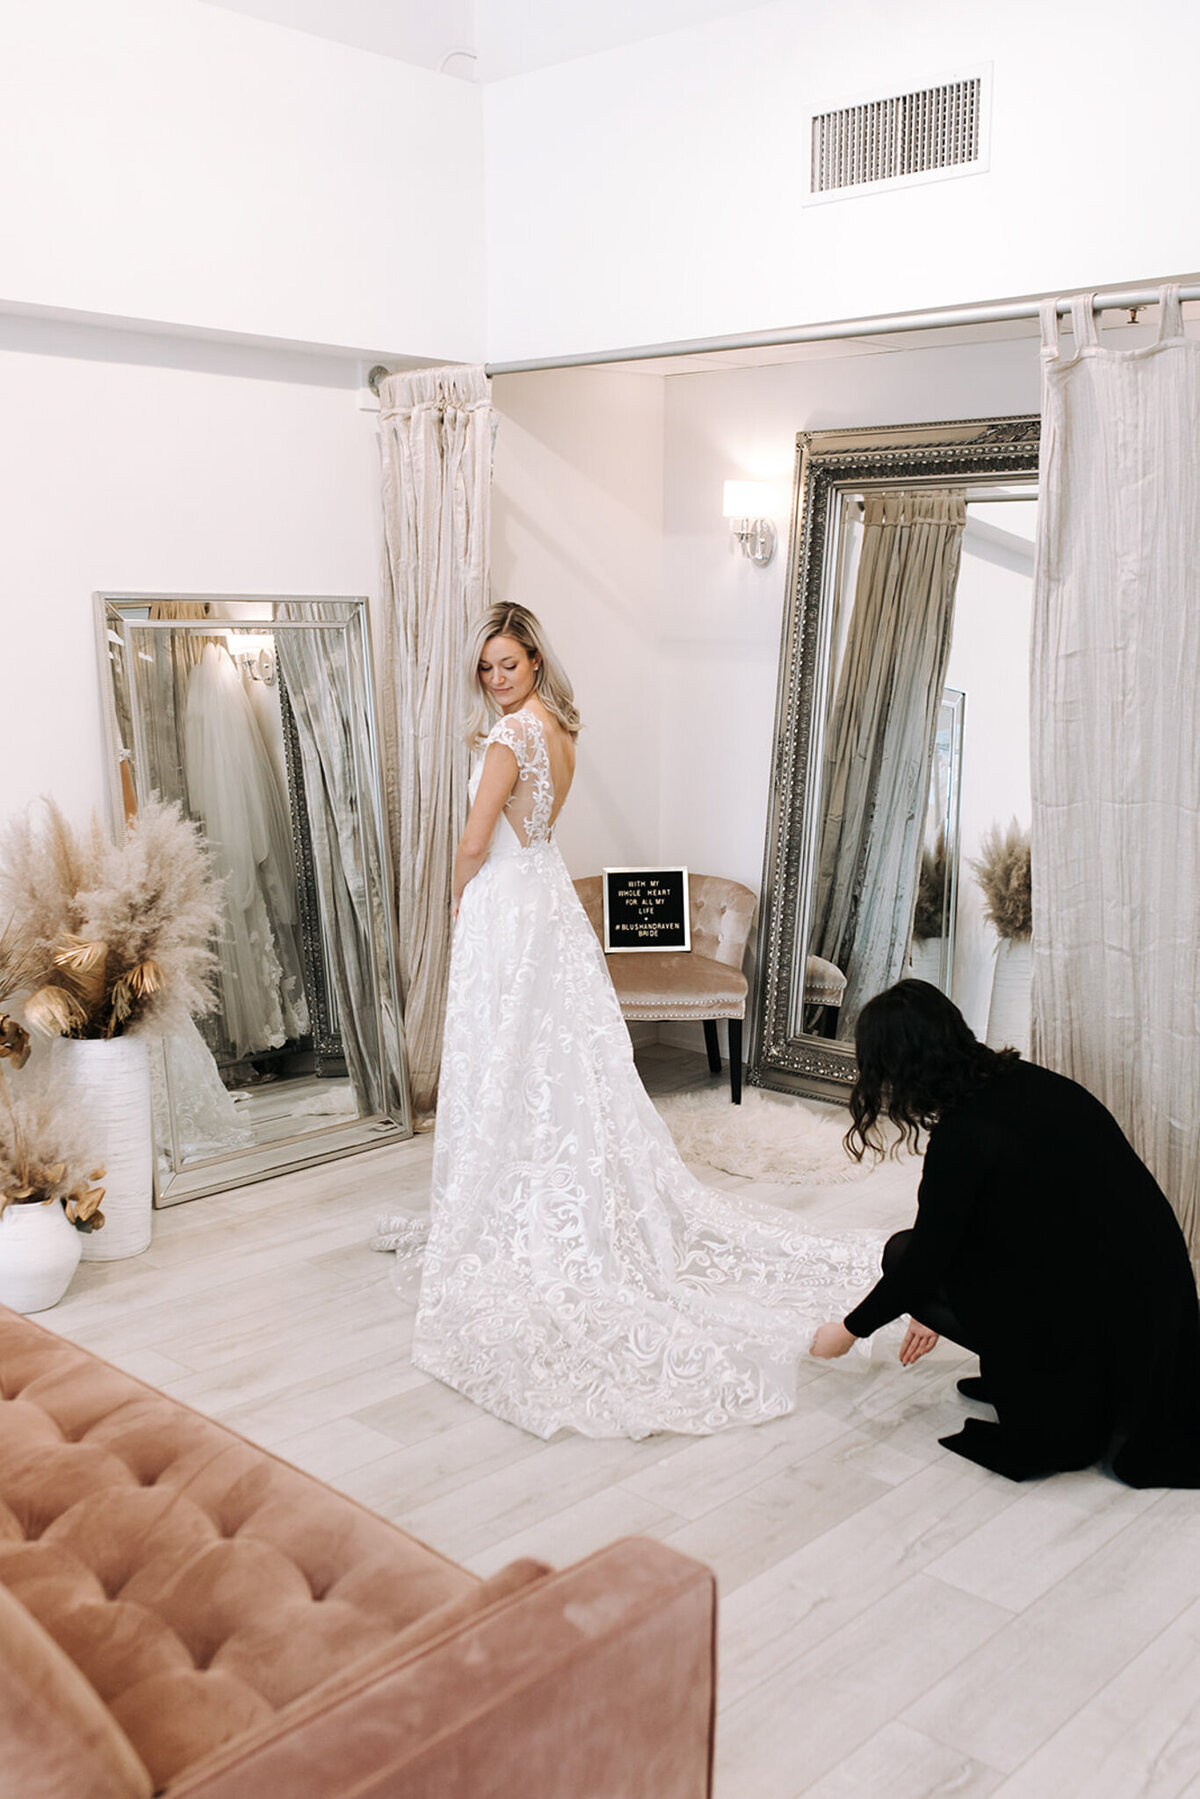 Bridal fitting at Blush & Raven, a couture wedding bridal boutique based in Calgary, Alberta. Featured on the Brontë Bride Vendor Guide.